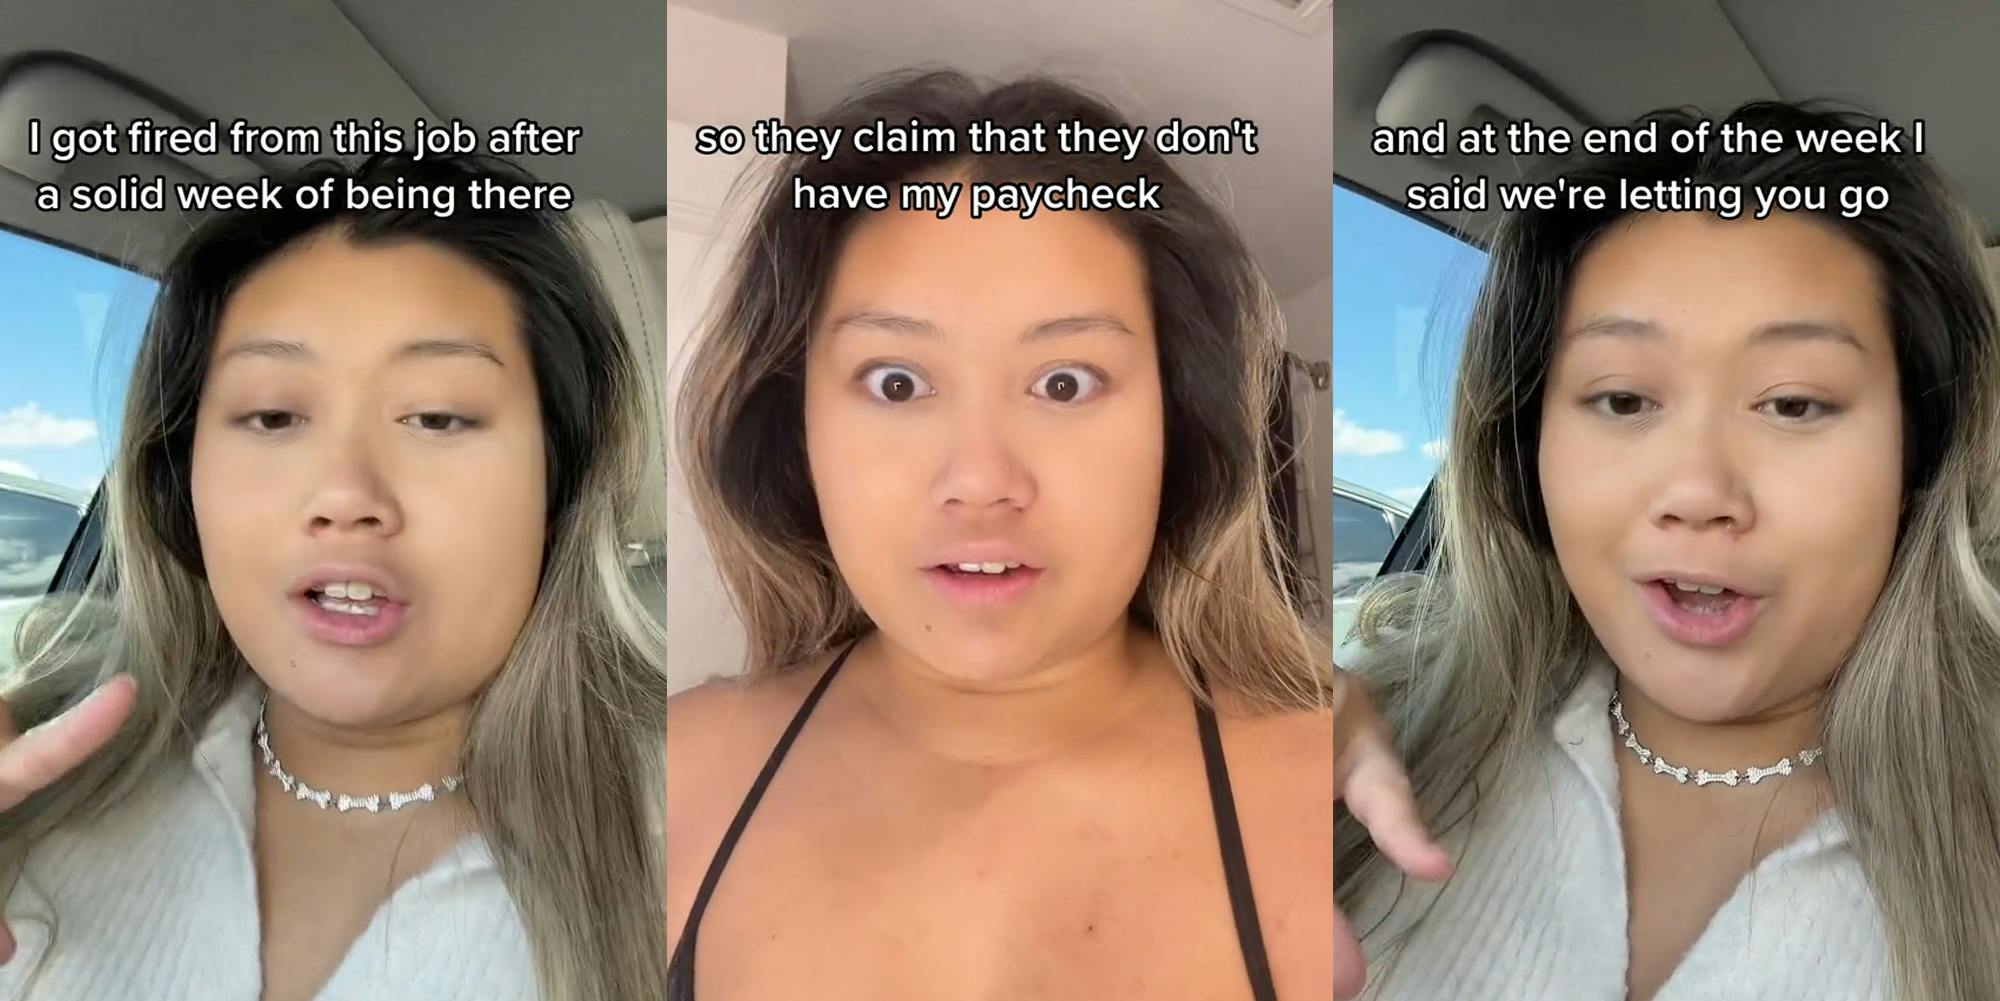 woman speaking in car with finger up caption "I got fired from this job after a solid week of being there" (l) woman speaking in sports bra caption "so they claim that they don't have my paycheck" (c) woman speaking in car caption "and at the end of the week I said we're letting you go" (r)